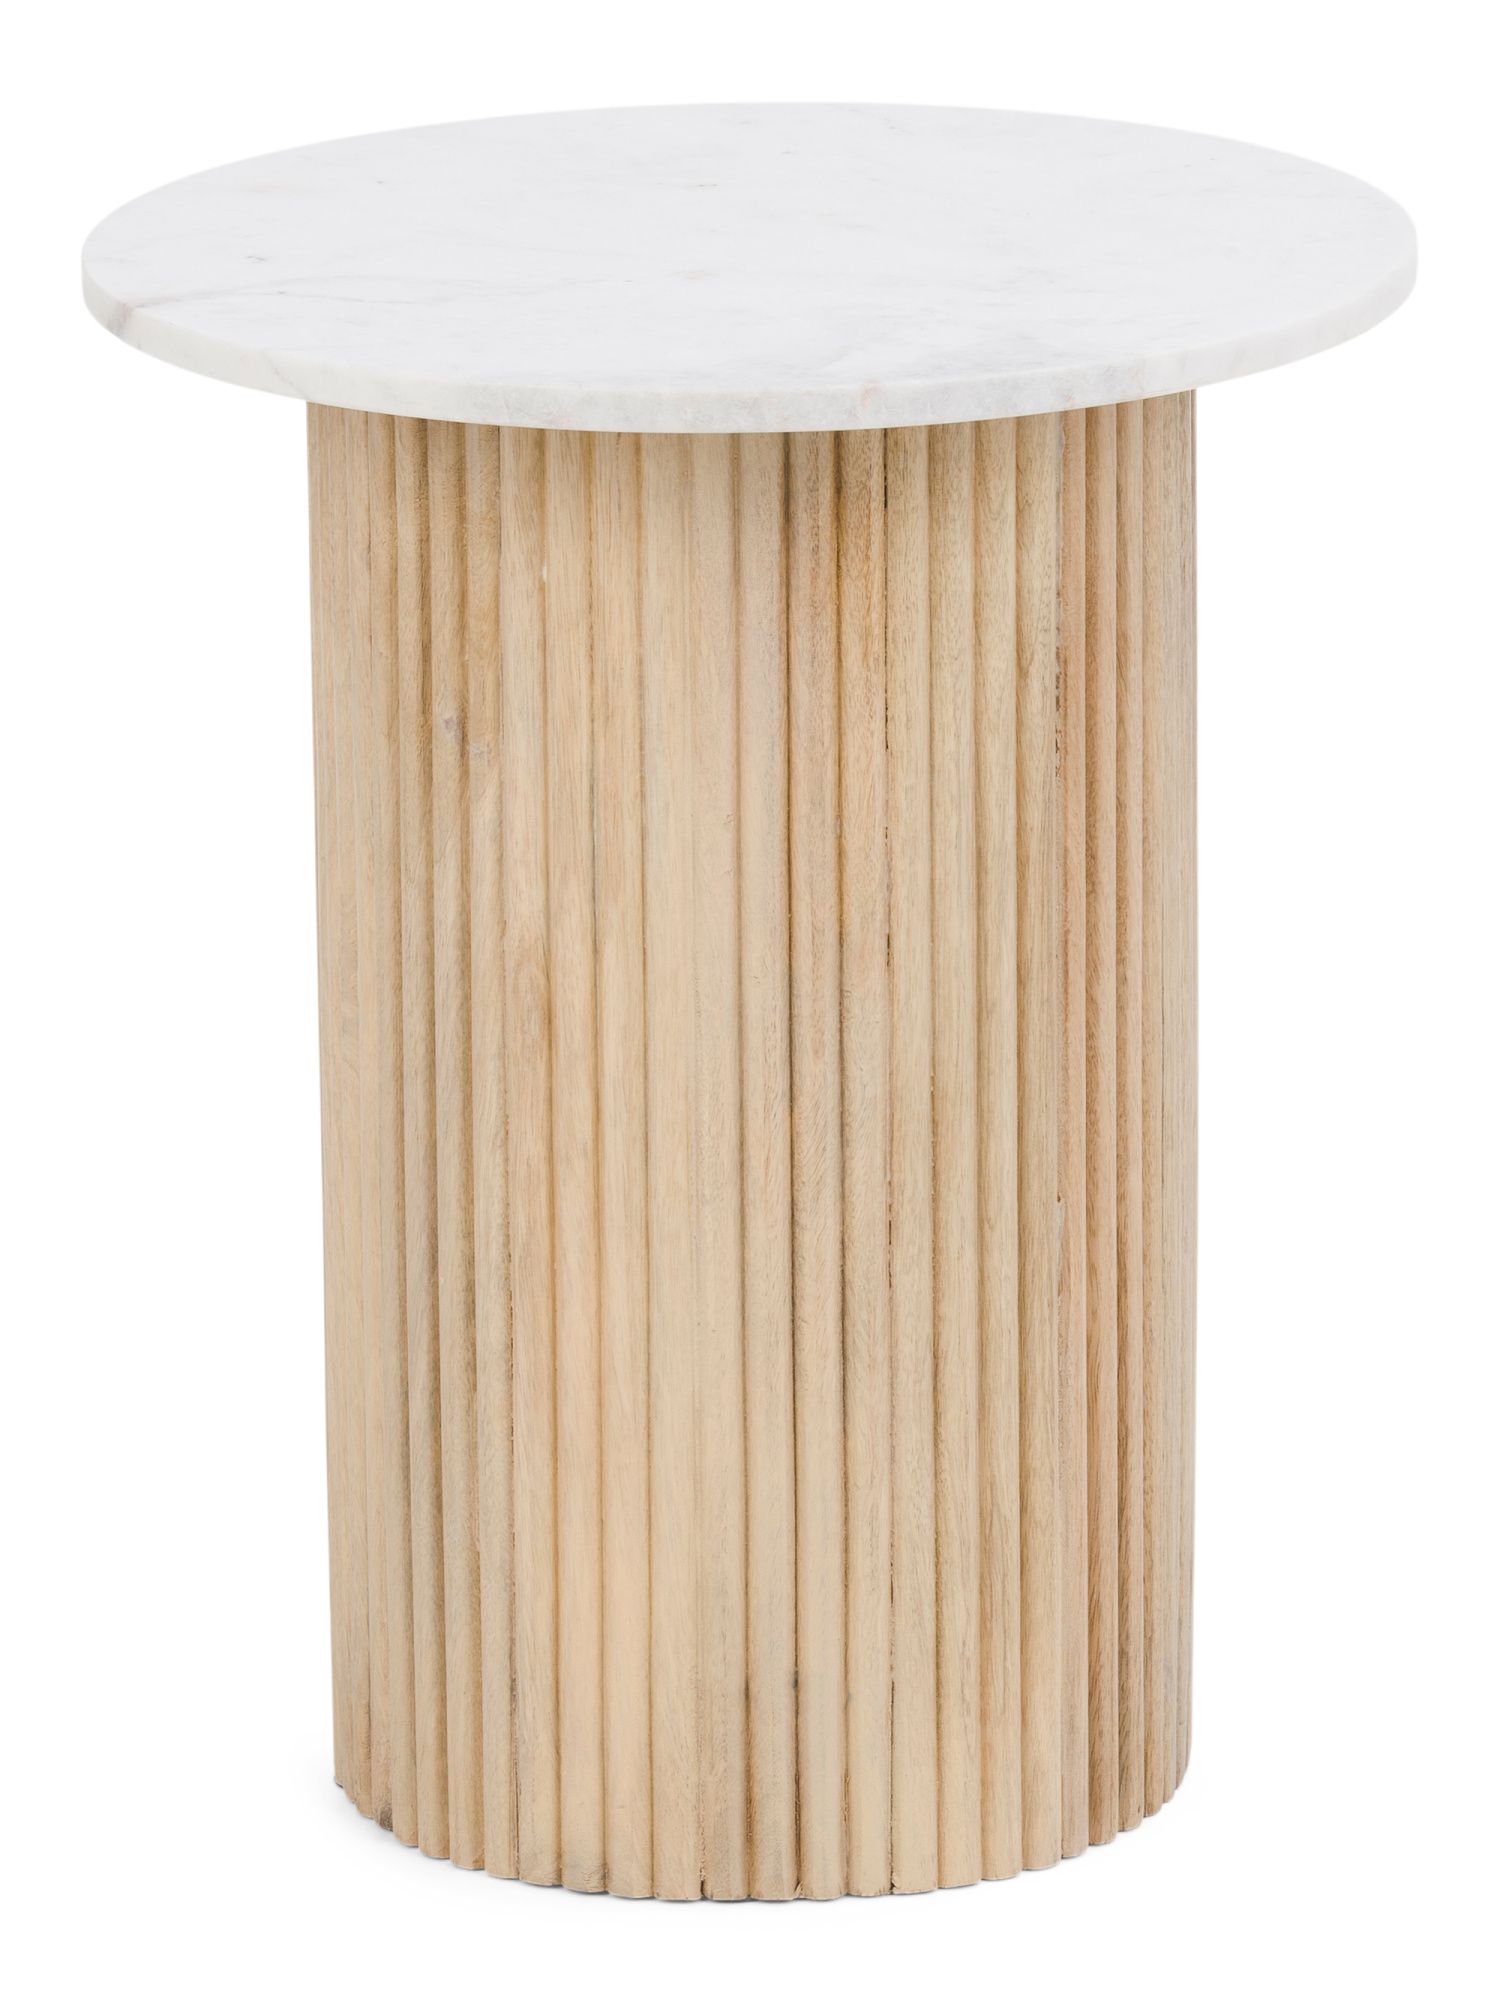 22in Marble Top Reeded Side Table | TJ Maxx